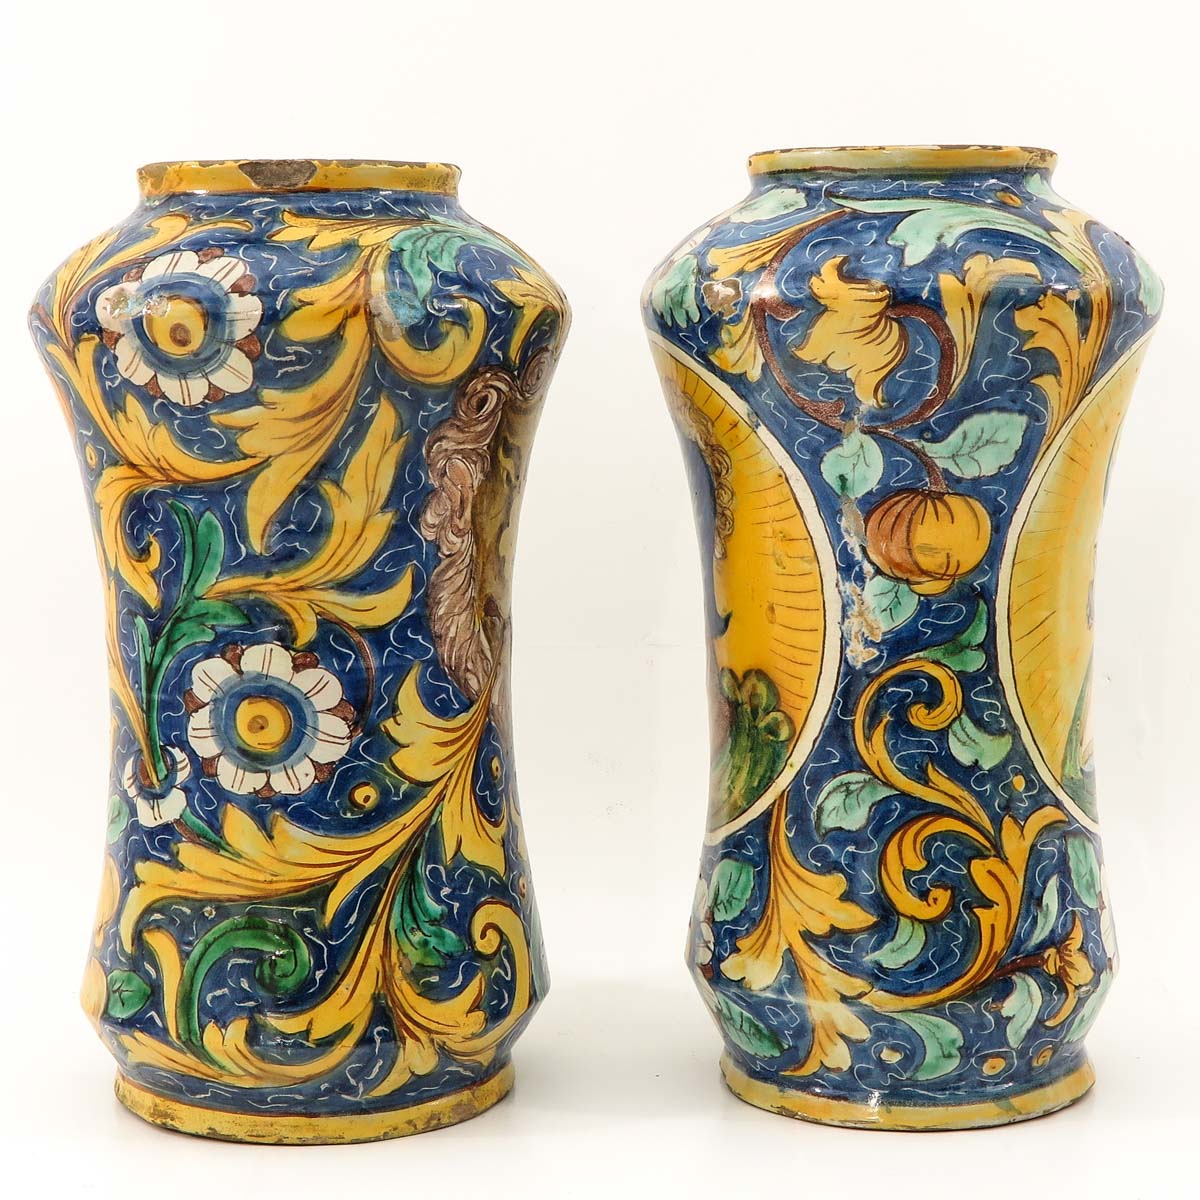 A Pair of 17th Century Italian Apothecary Jars - Image 4 of 9